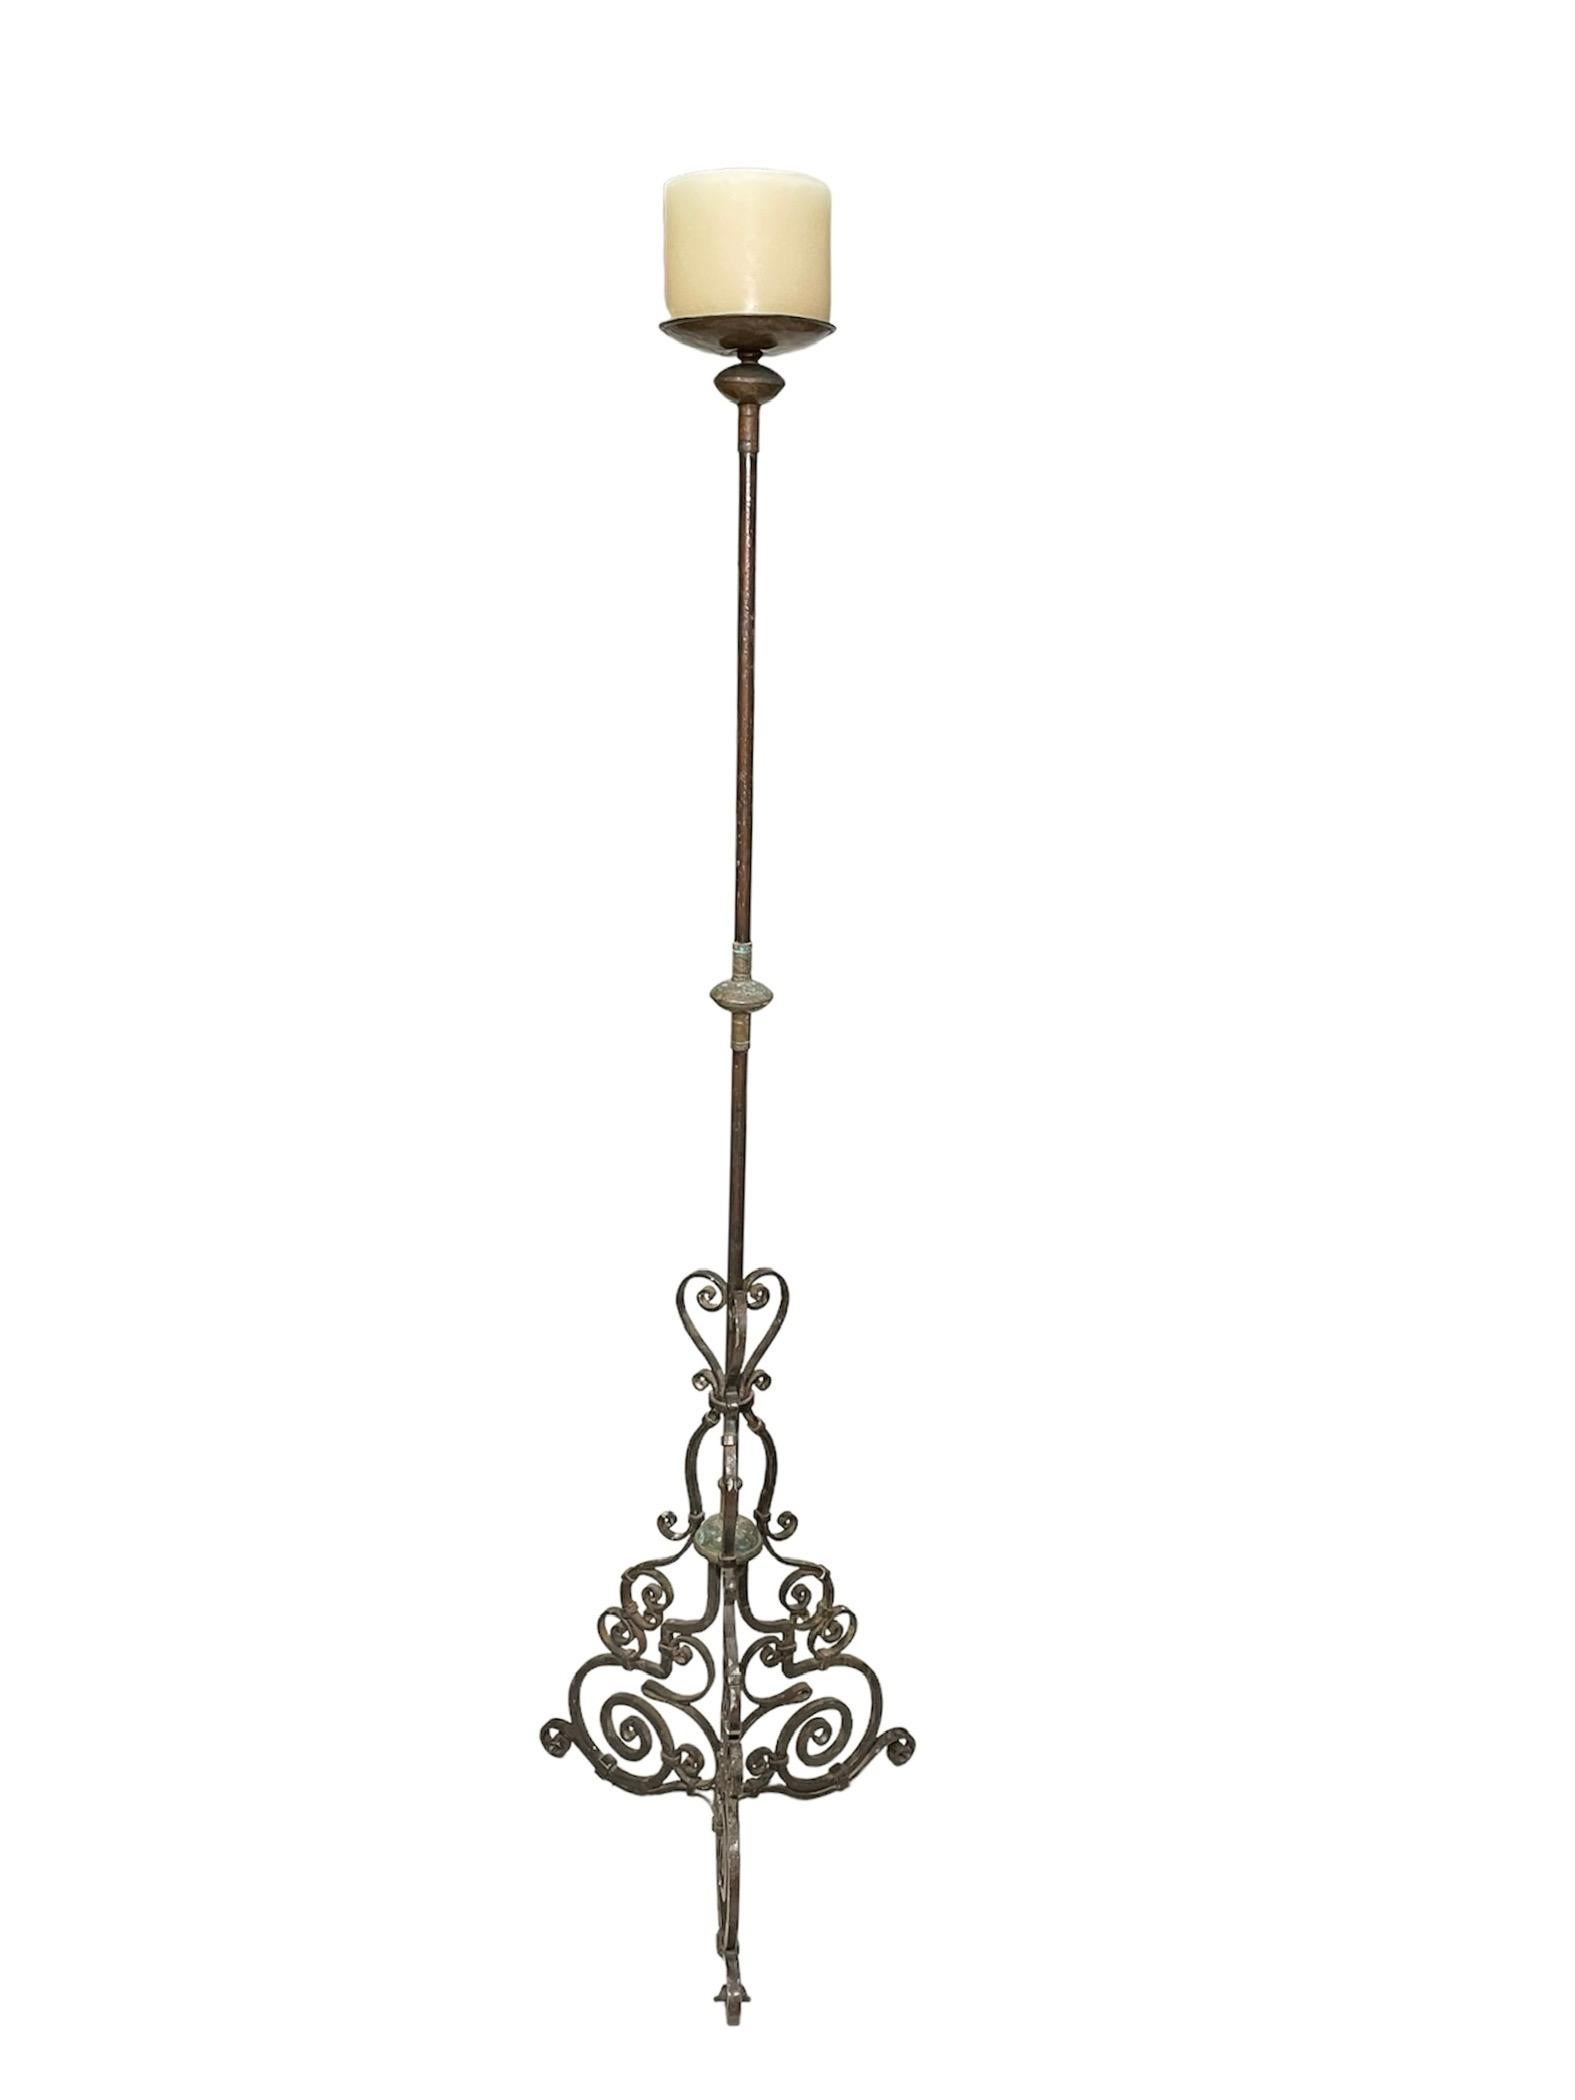 Gothic Style Wrought Iron Candle holder/Torchere For Sale 5